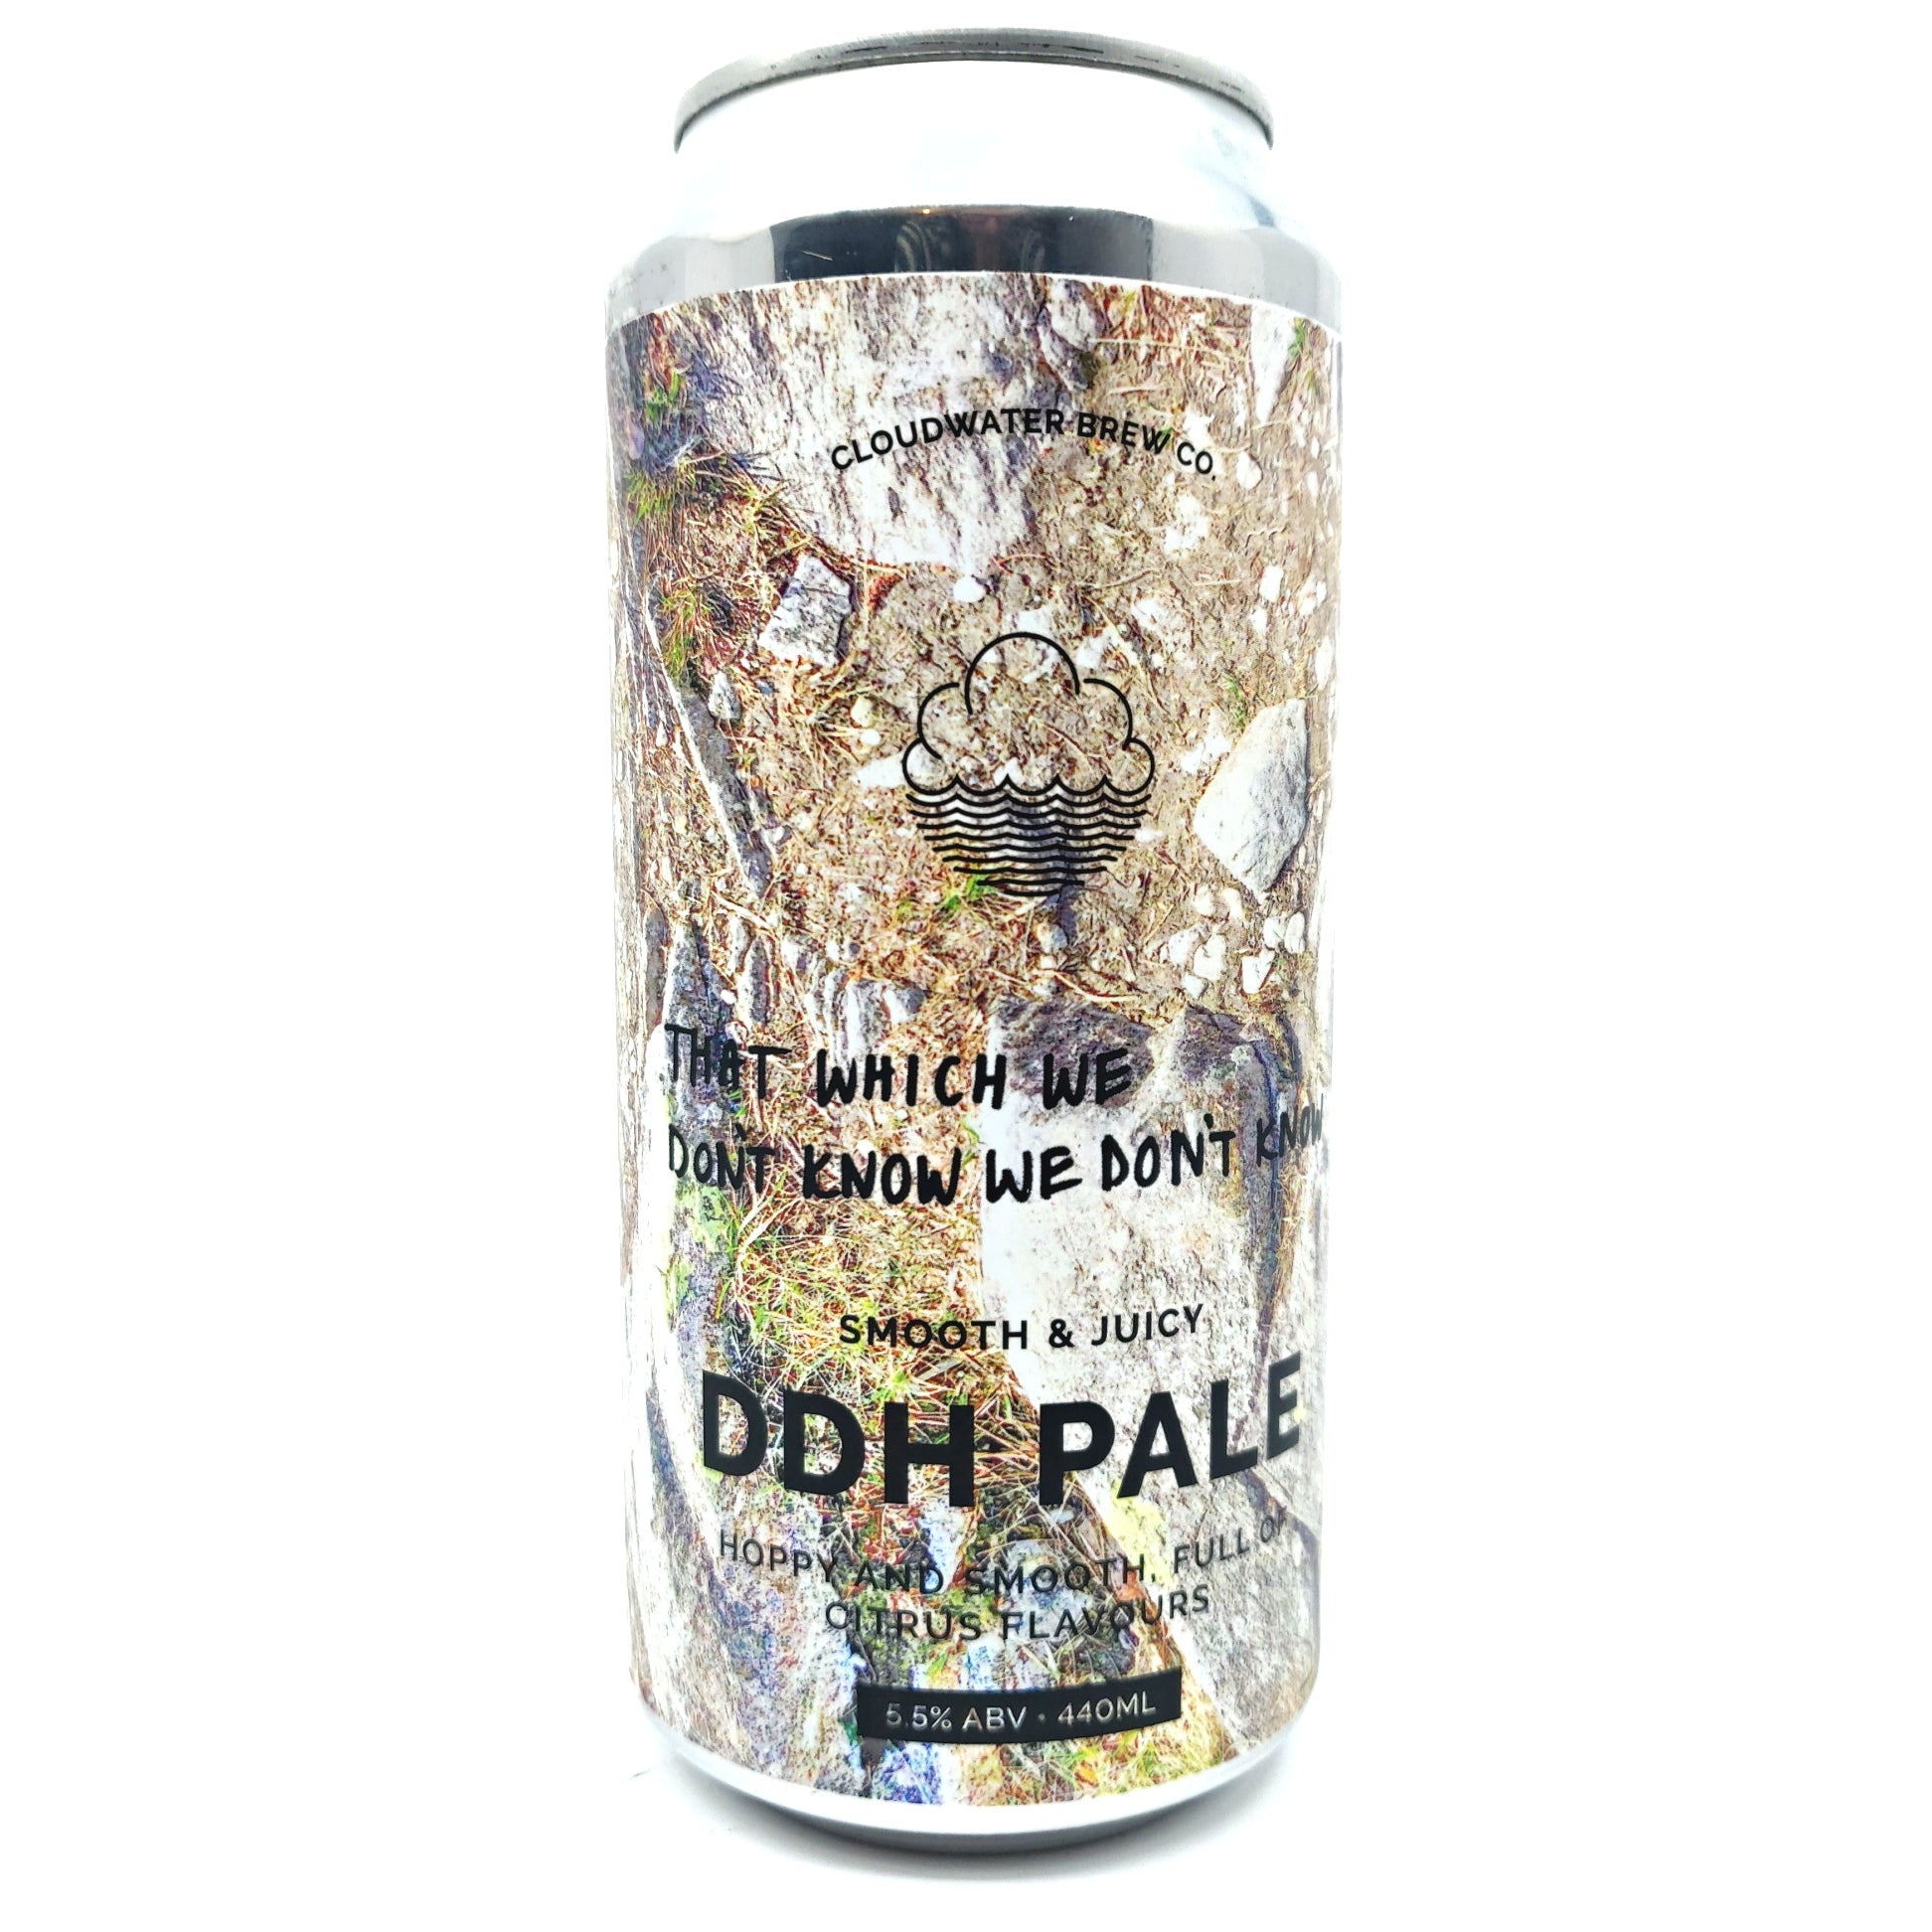 Cloudwater That Which We Don't Know We Don't Know DDH Pale 5.5% (440ml can)-Hop Burns & Black